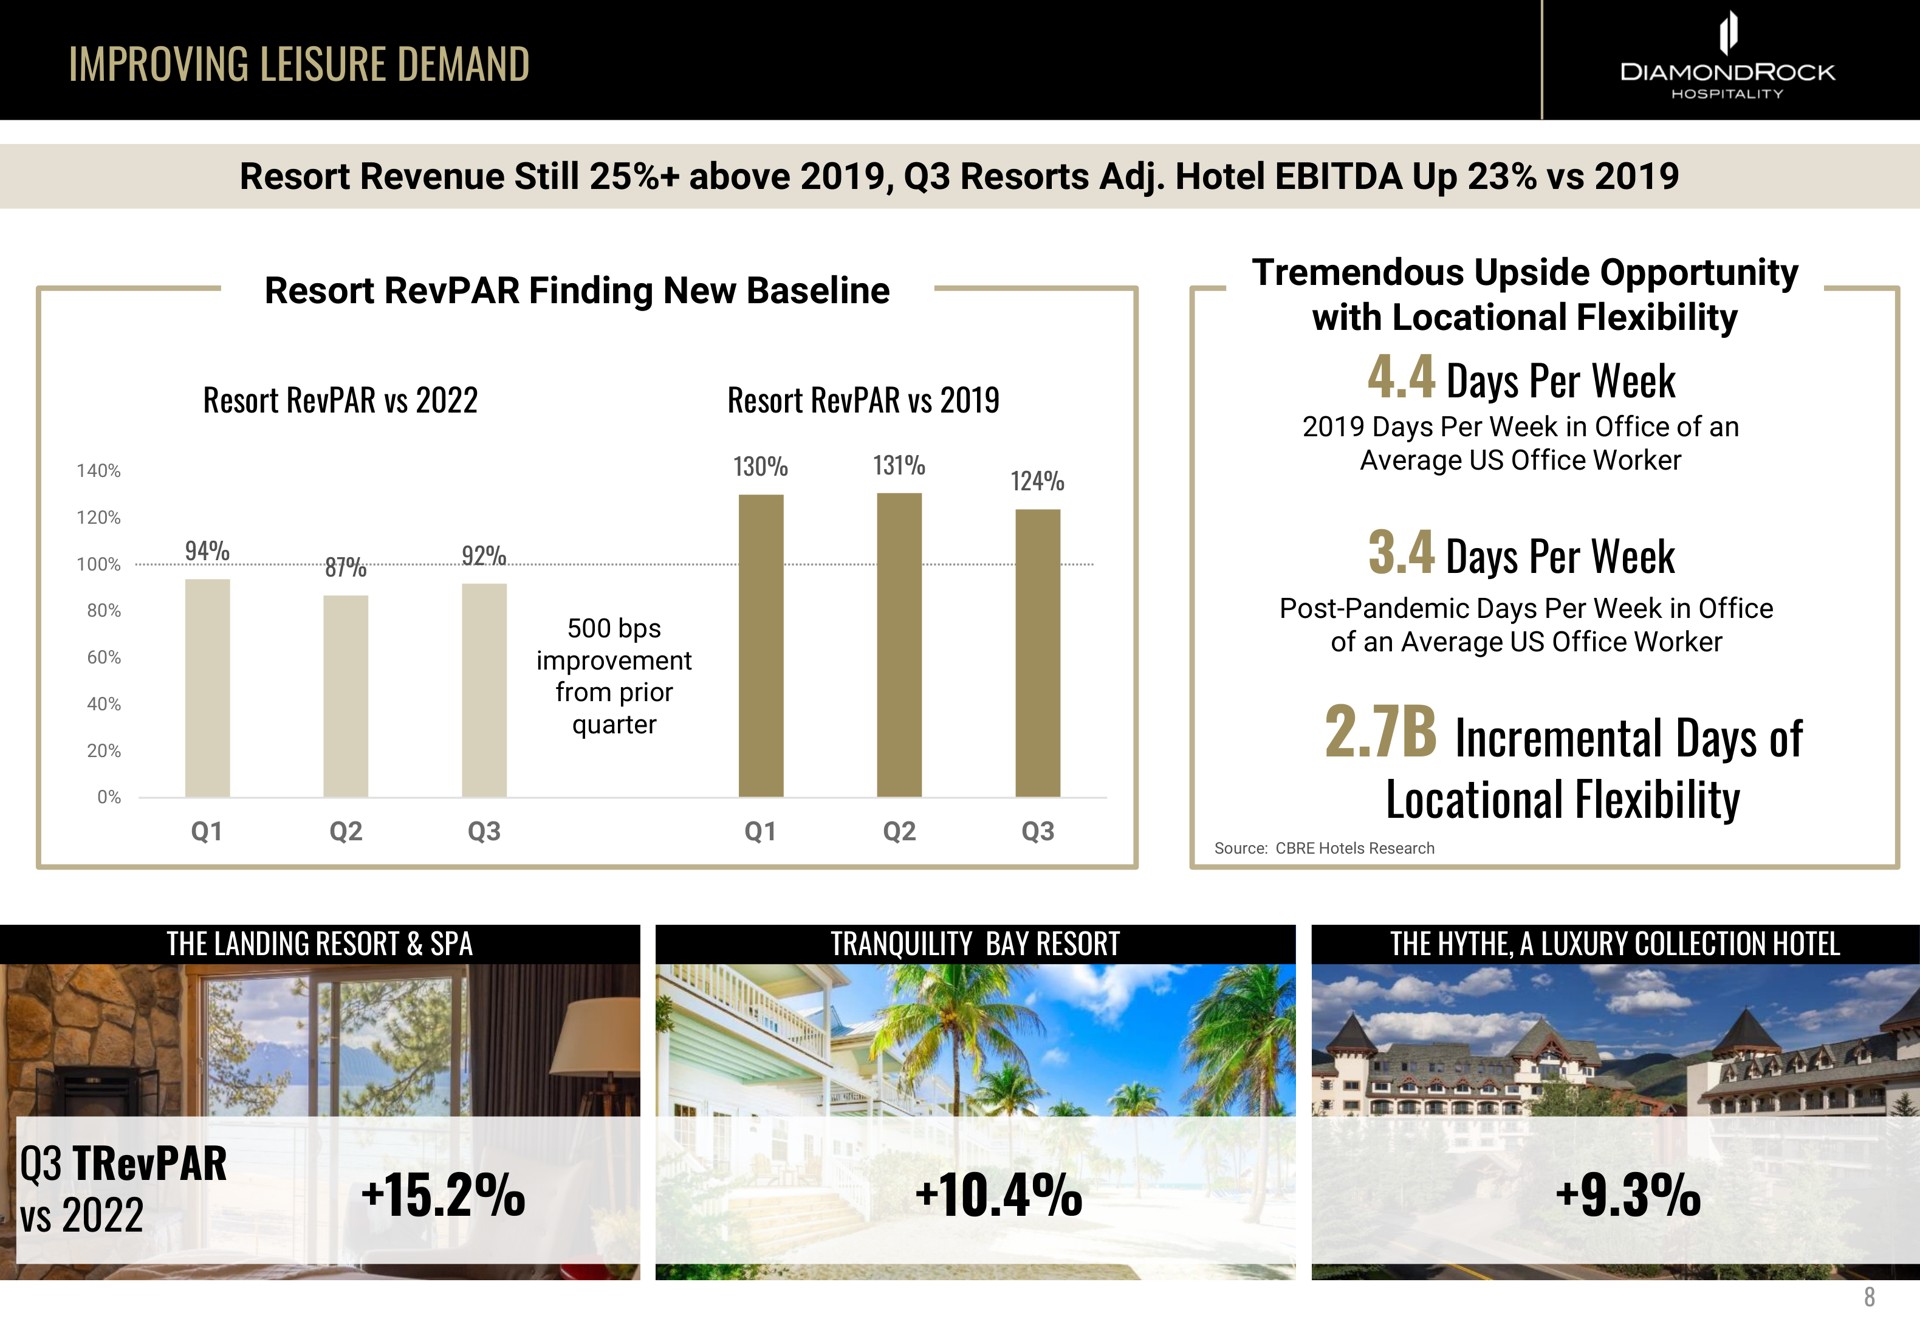 improving leisure demand resort revenue still above resorts hotel up resort finding new tremendous upside opportunity with locational flexibility days per week days per week incremental days of locational flexibility | DiamondRock Hospitality